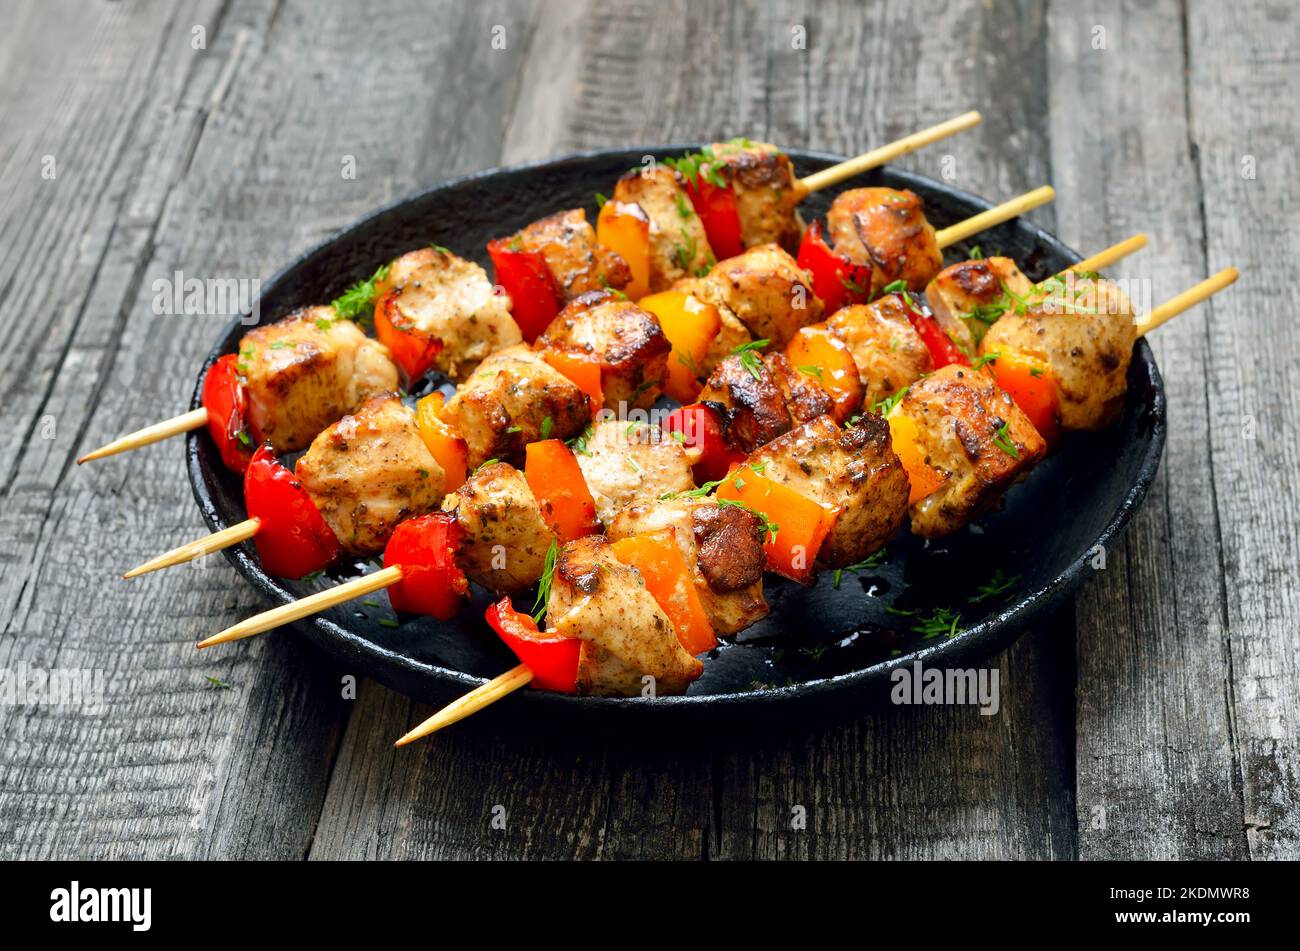 Fried chicken kebabs on plate Stock Photo